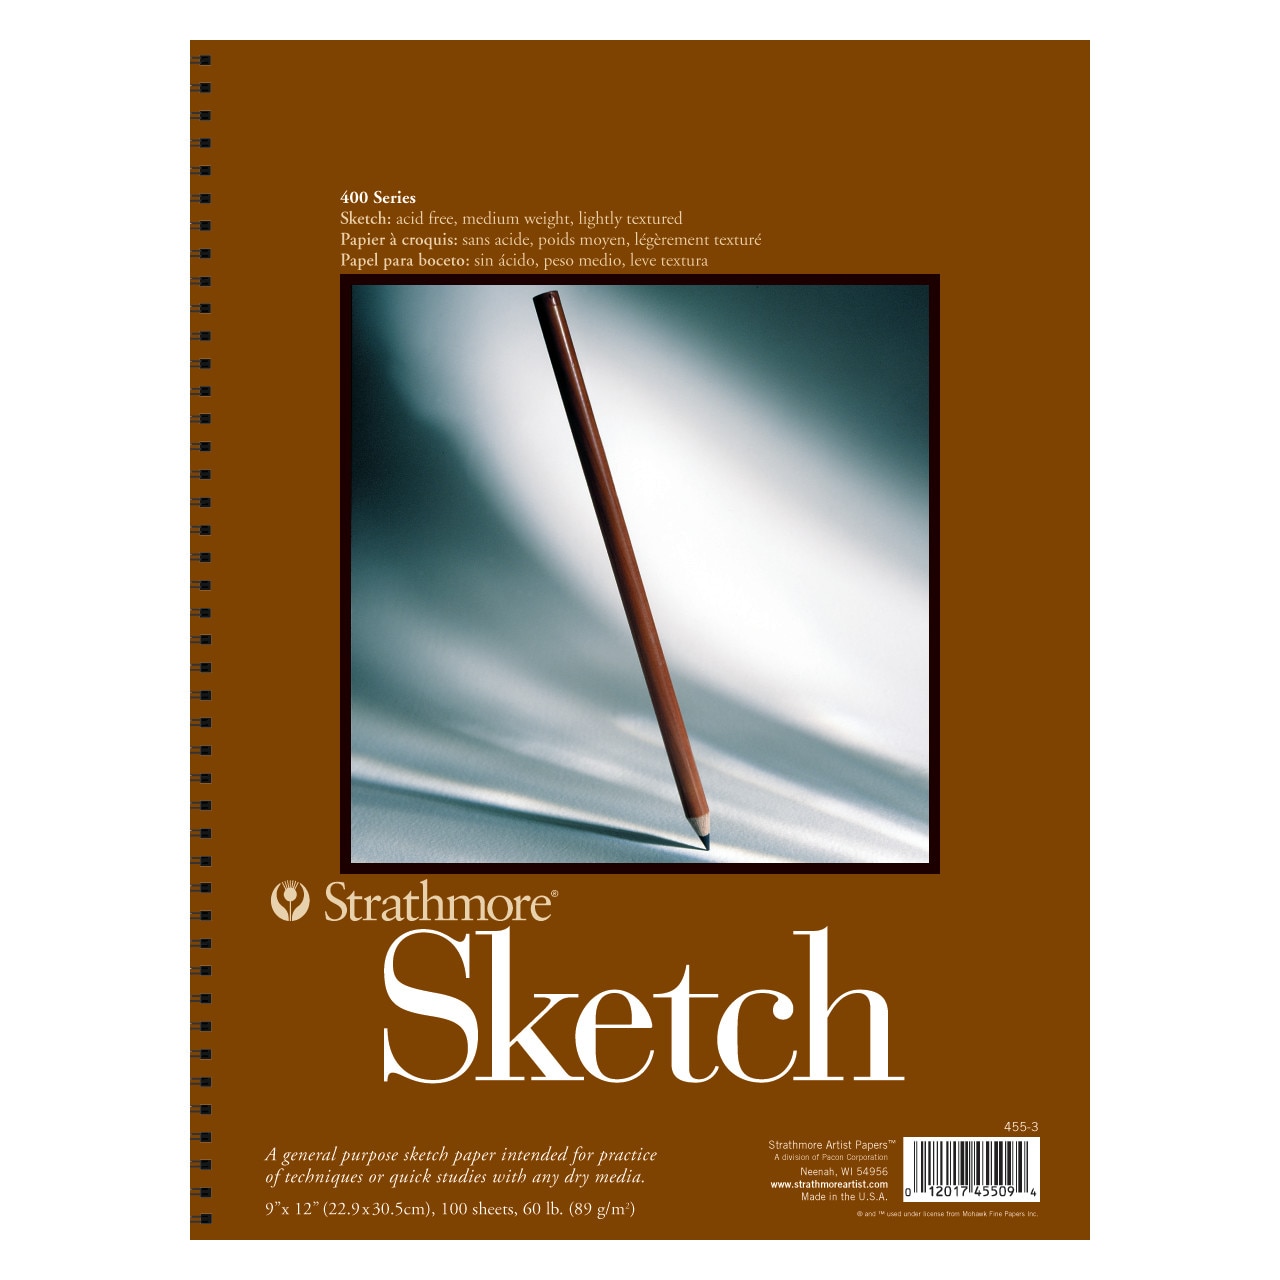 Strathmore Sketch Paper Pad, 400 Series, 9" x 12", 100 Sheets